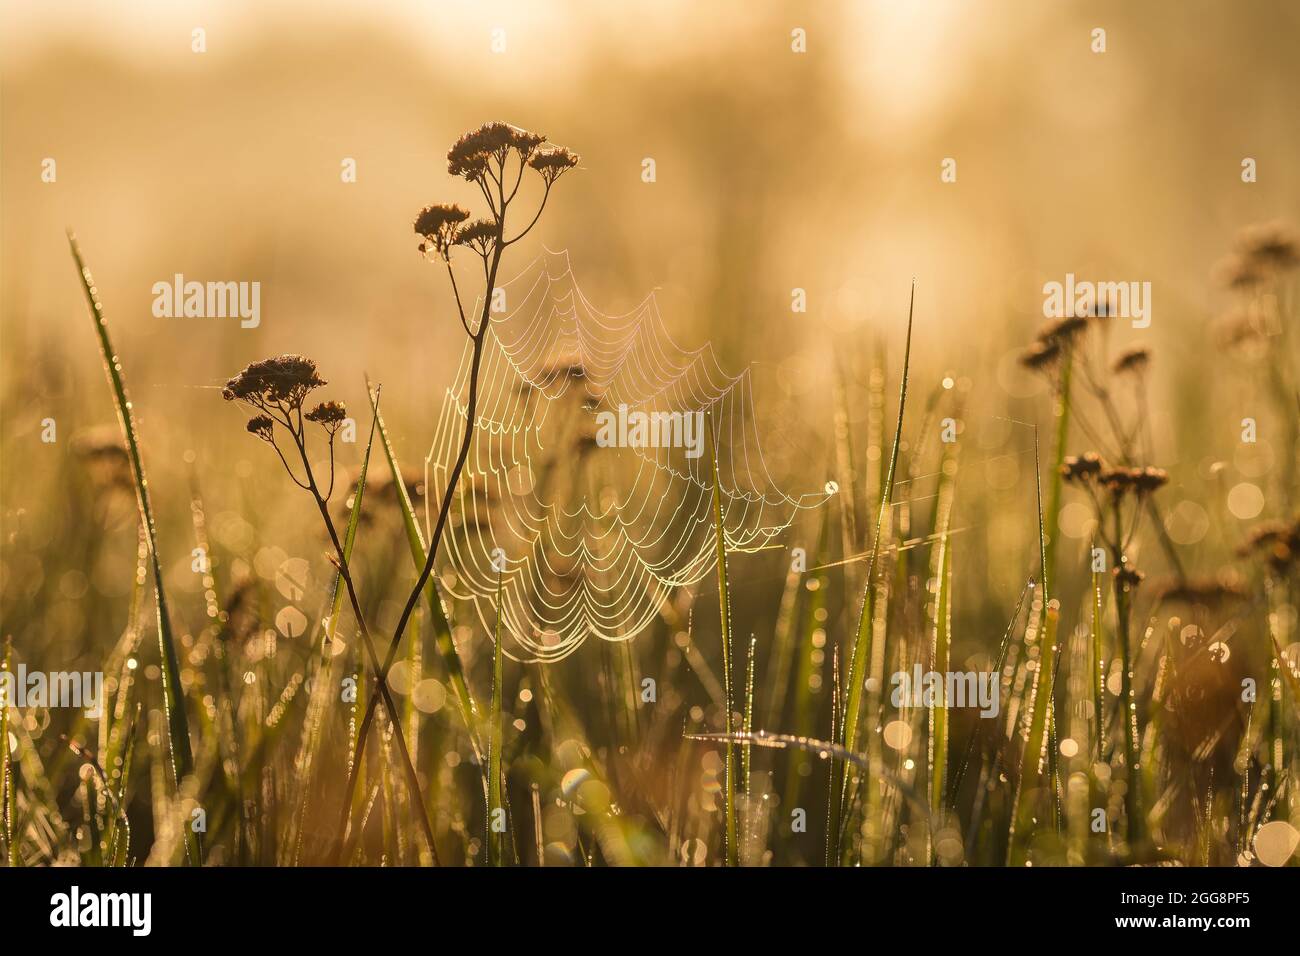 Spider web on a meadow grass early in the morning sun. Stock Photo